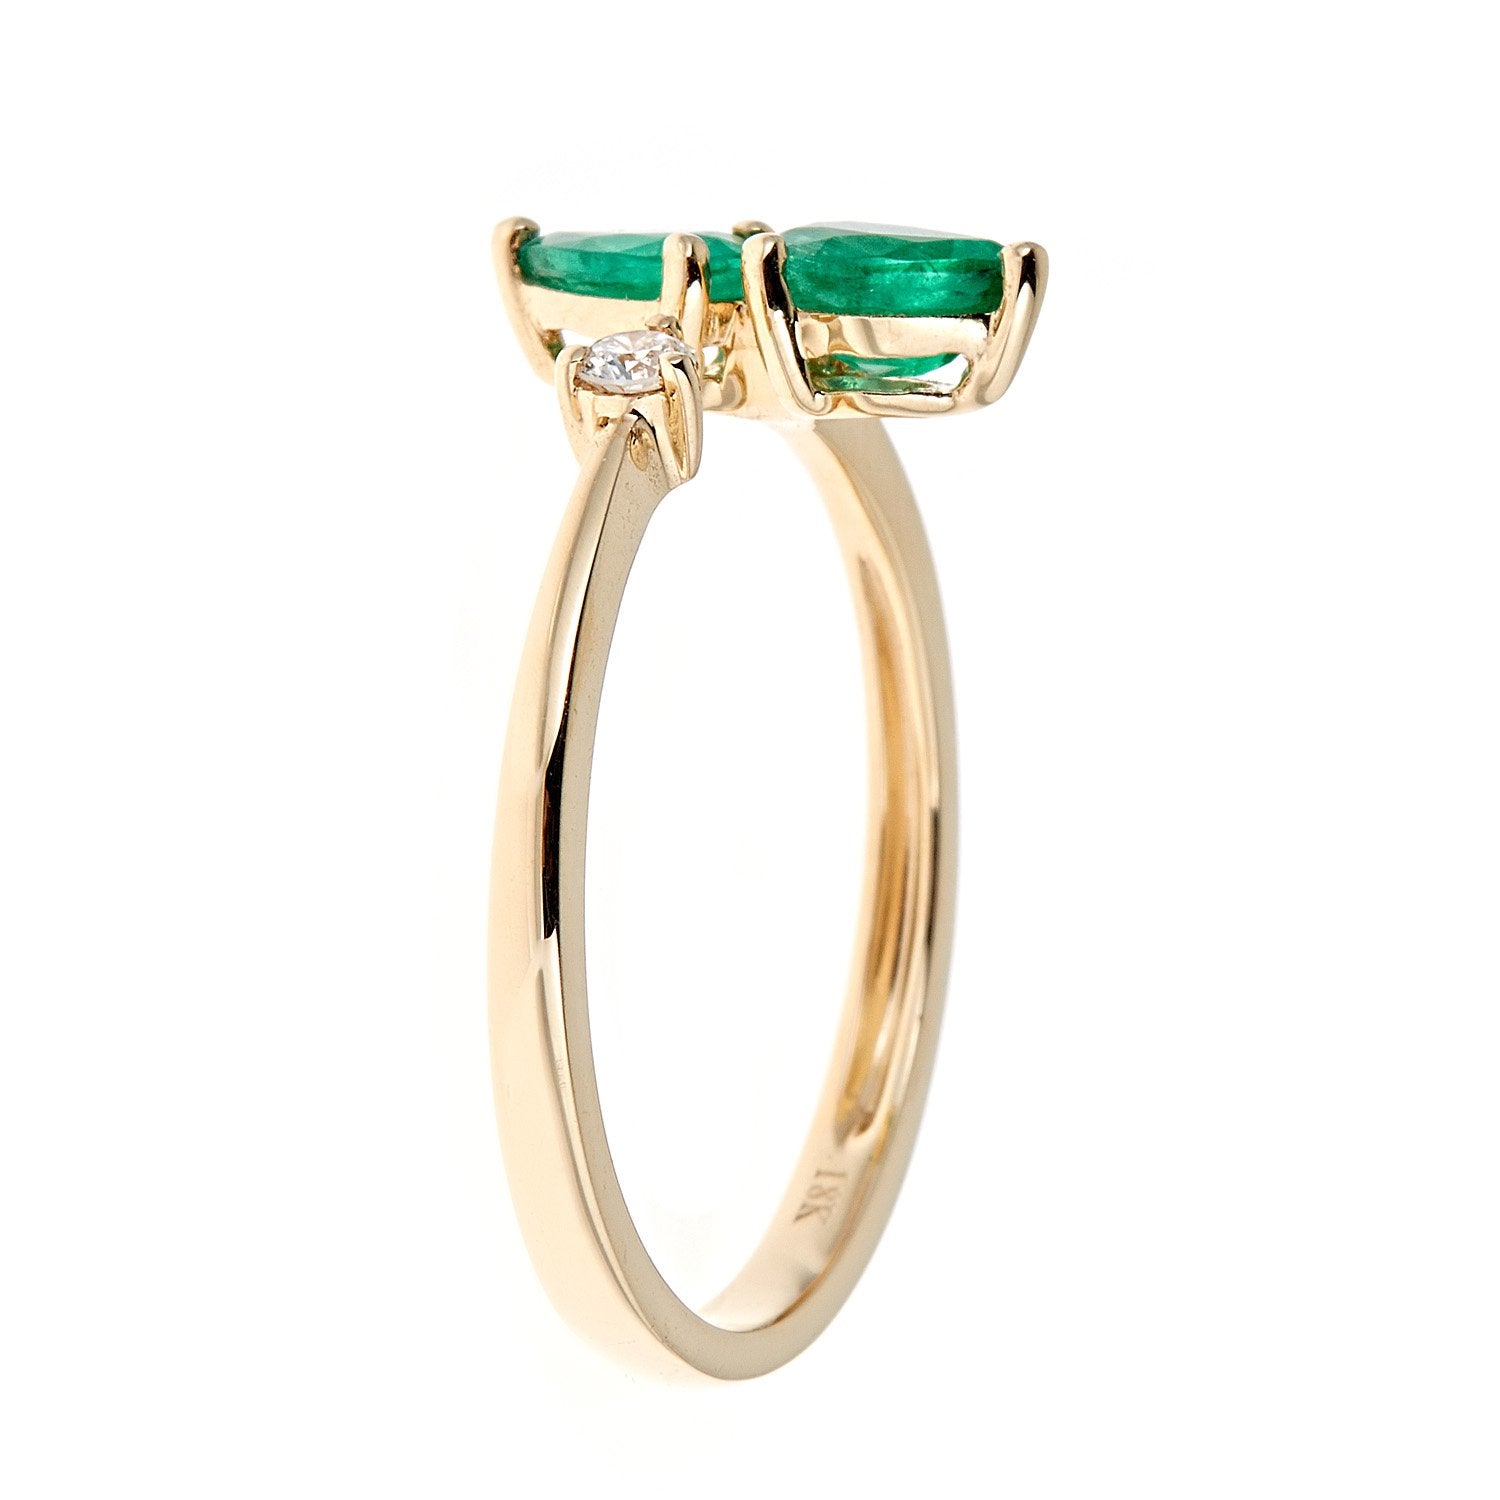 18K Yellow Gold Emerald and Diamond Ring by Anika and August 2